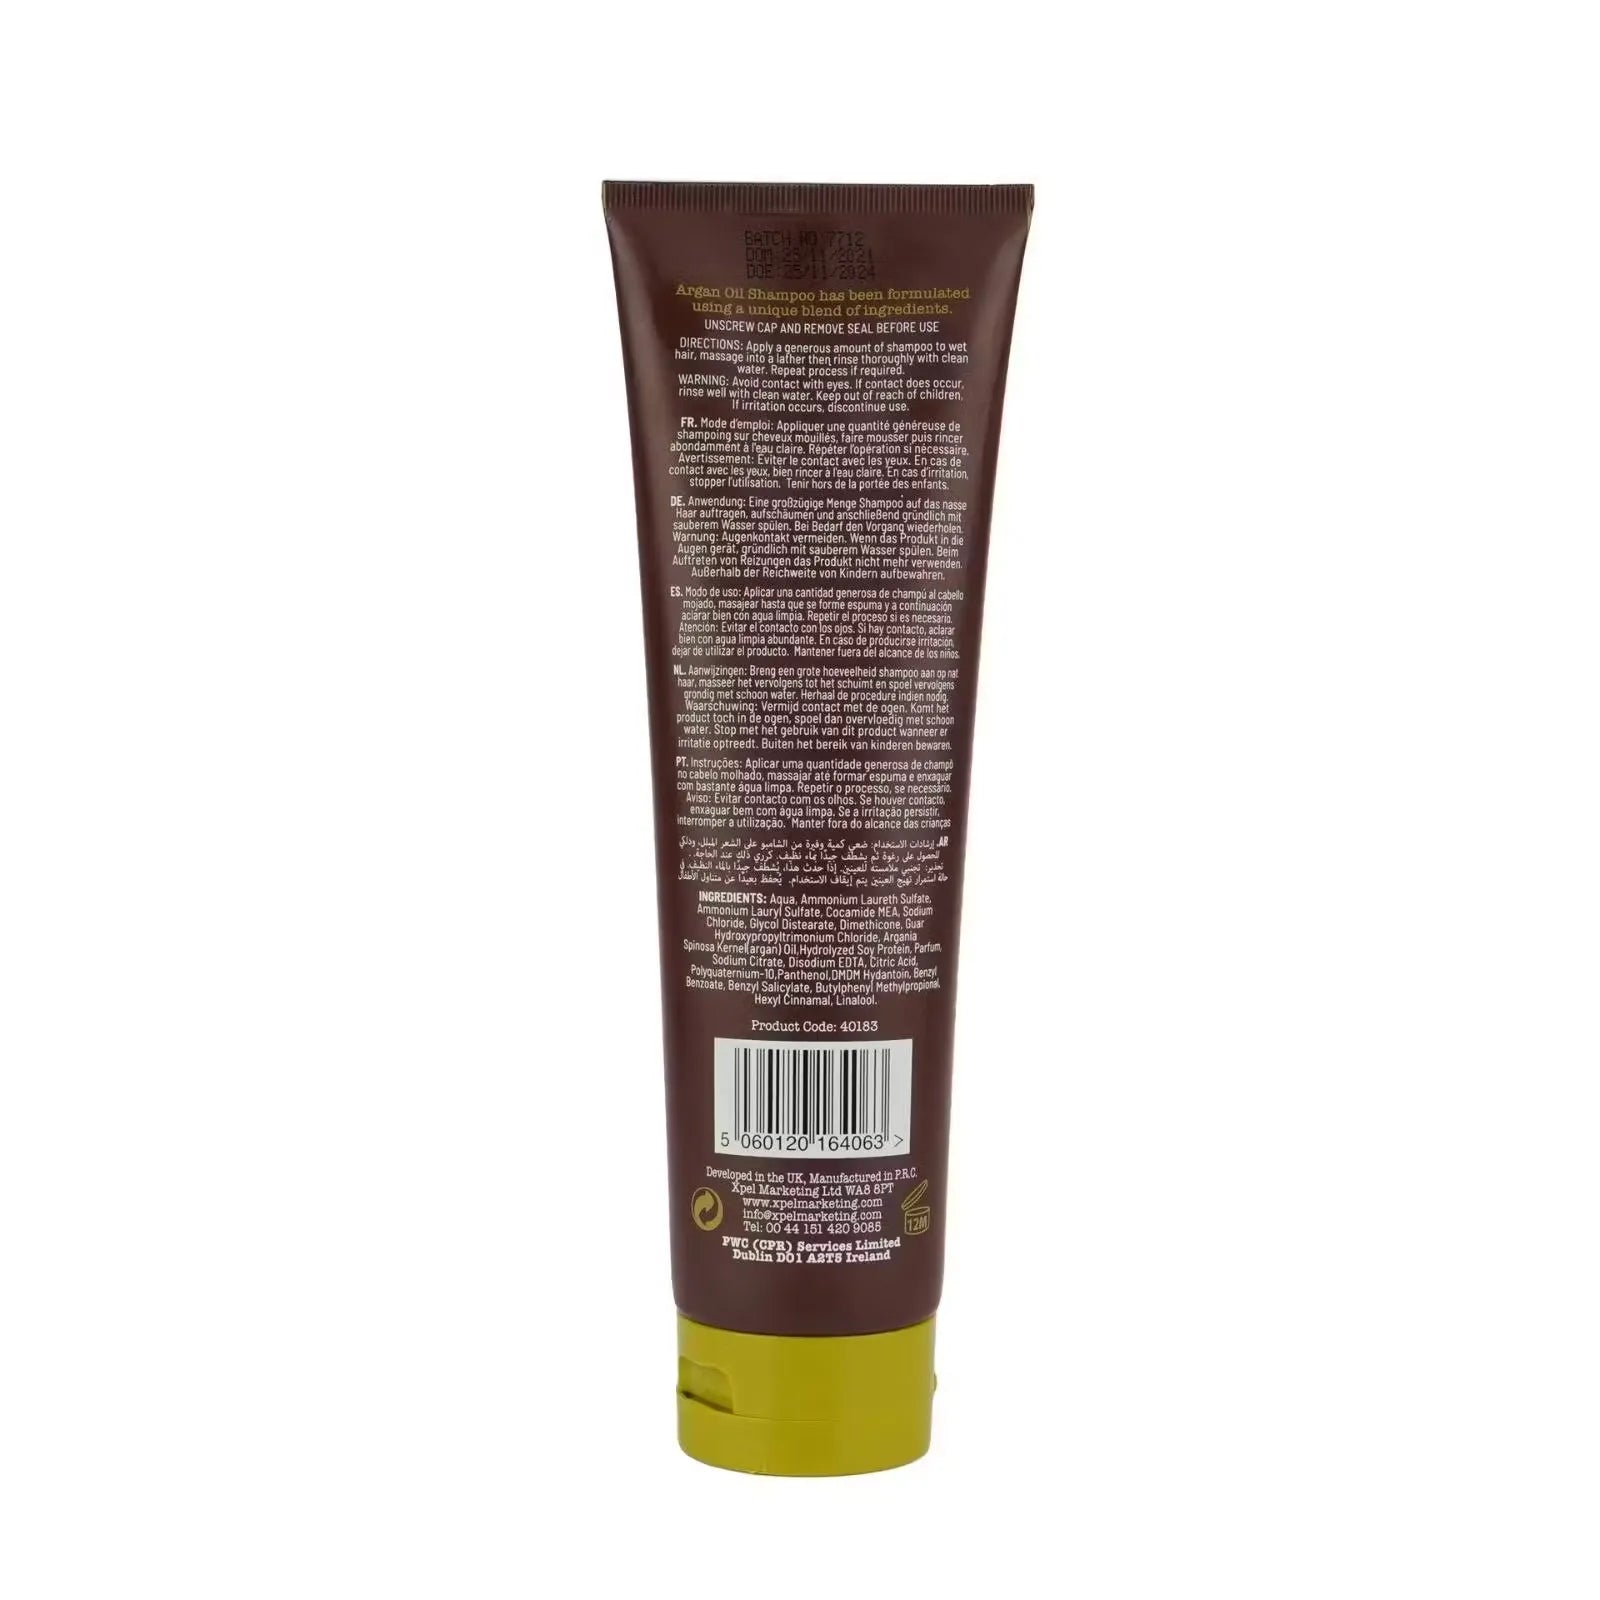 Bottle of Argan Oil Hydrating Conditioner (300ml) with argan oil extract, emphasizing smooth and shiny hair. May also include a hand pouring the conditioner or hair styled after using it.